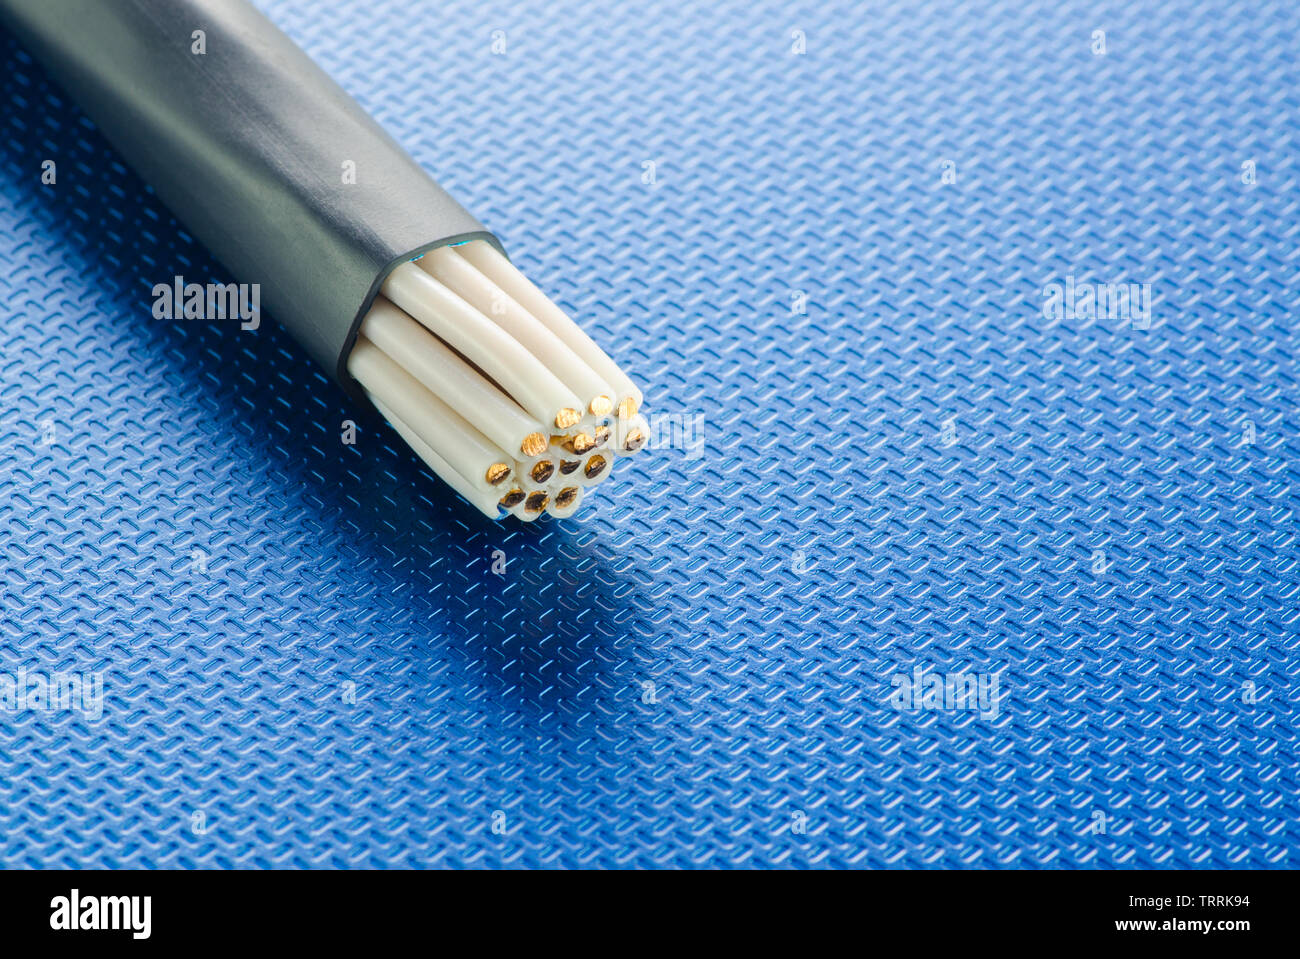 The cross-section of the control cable lies on the blue technological surface Stock Photo